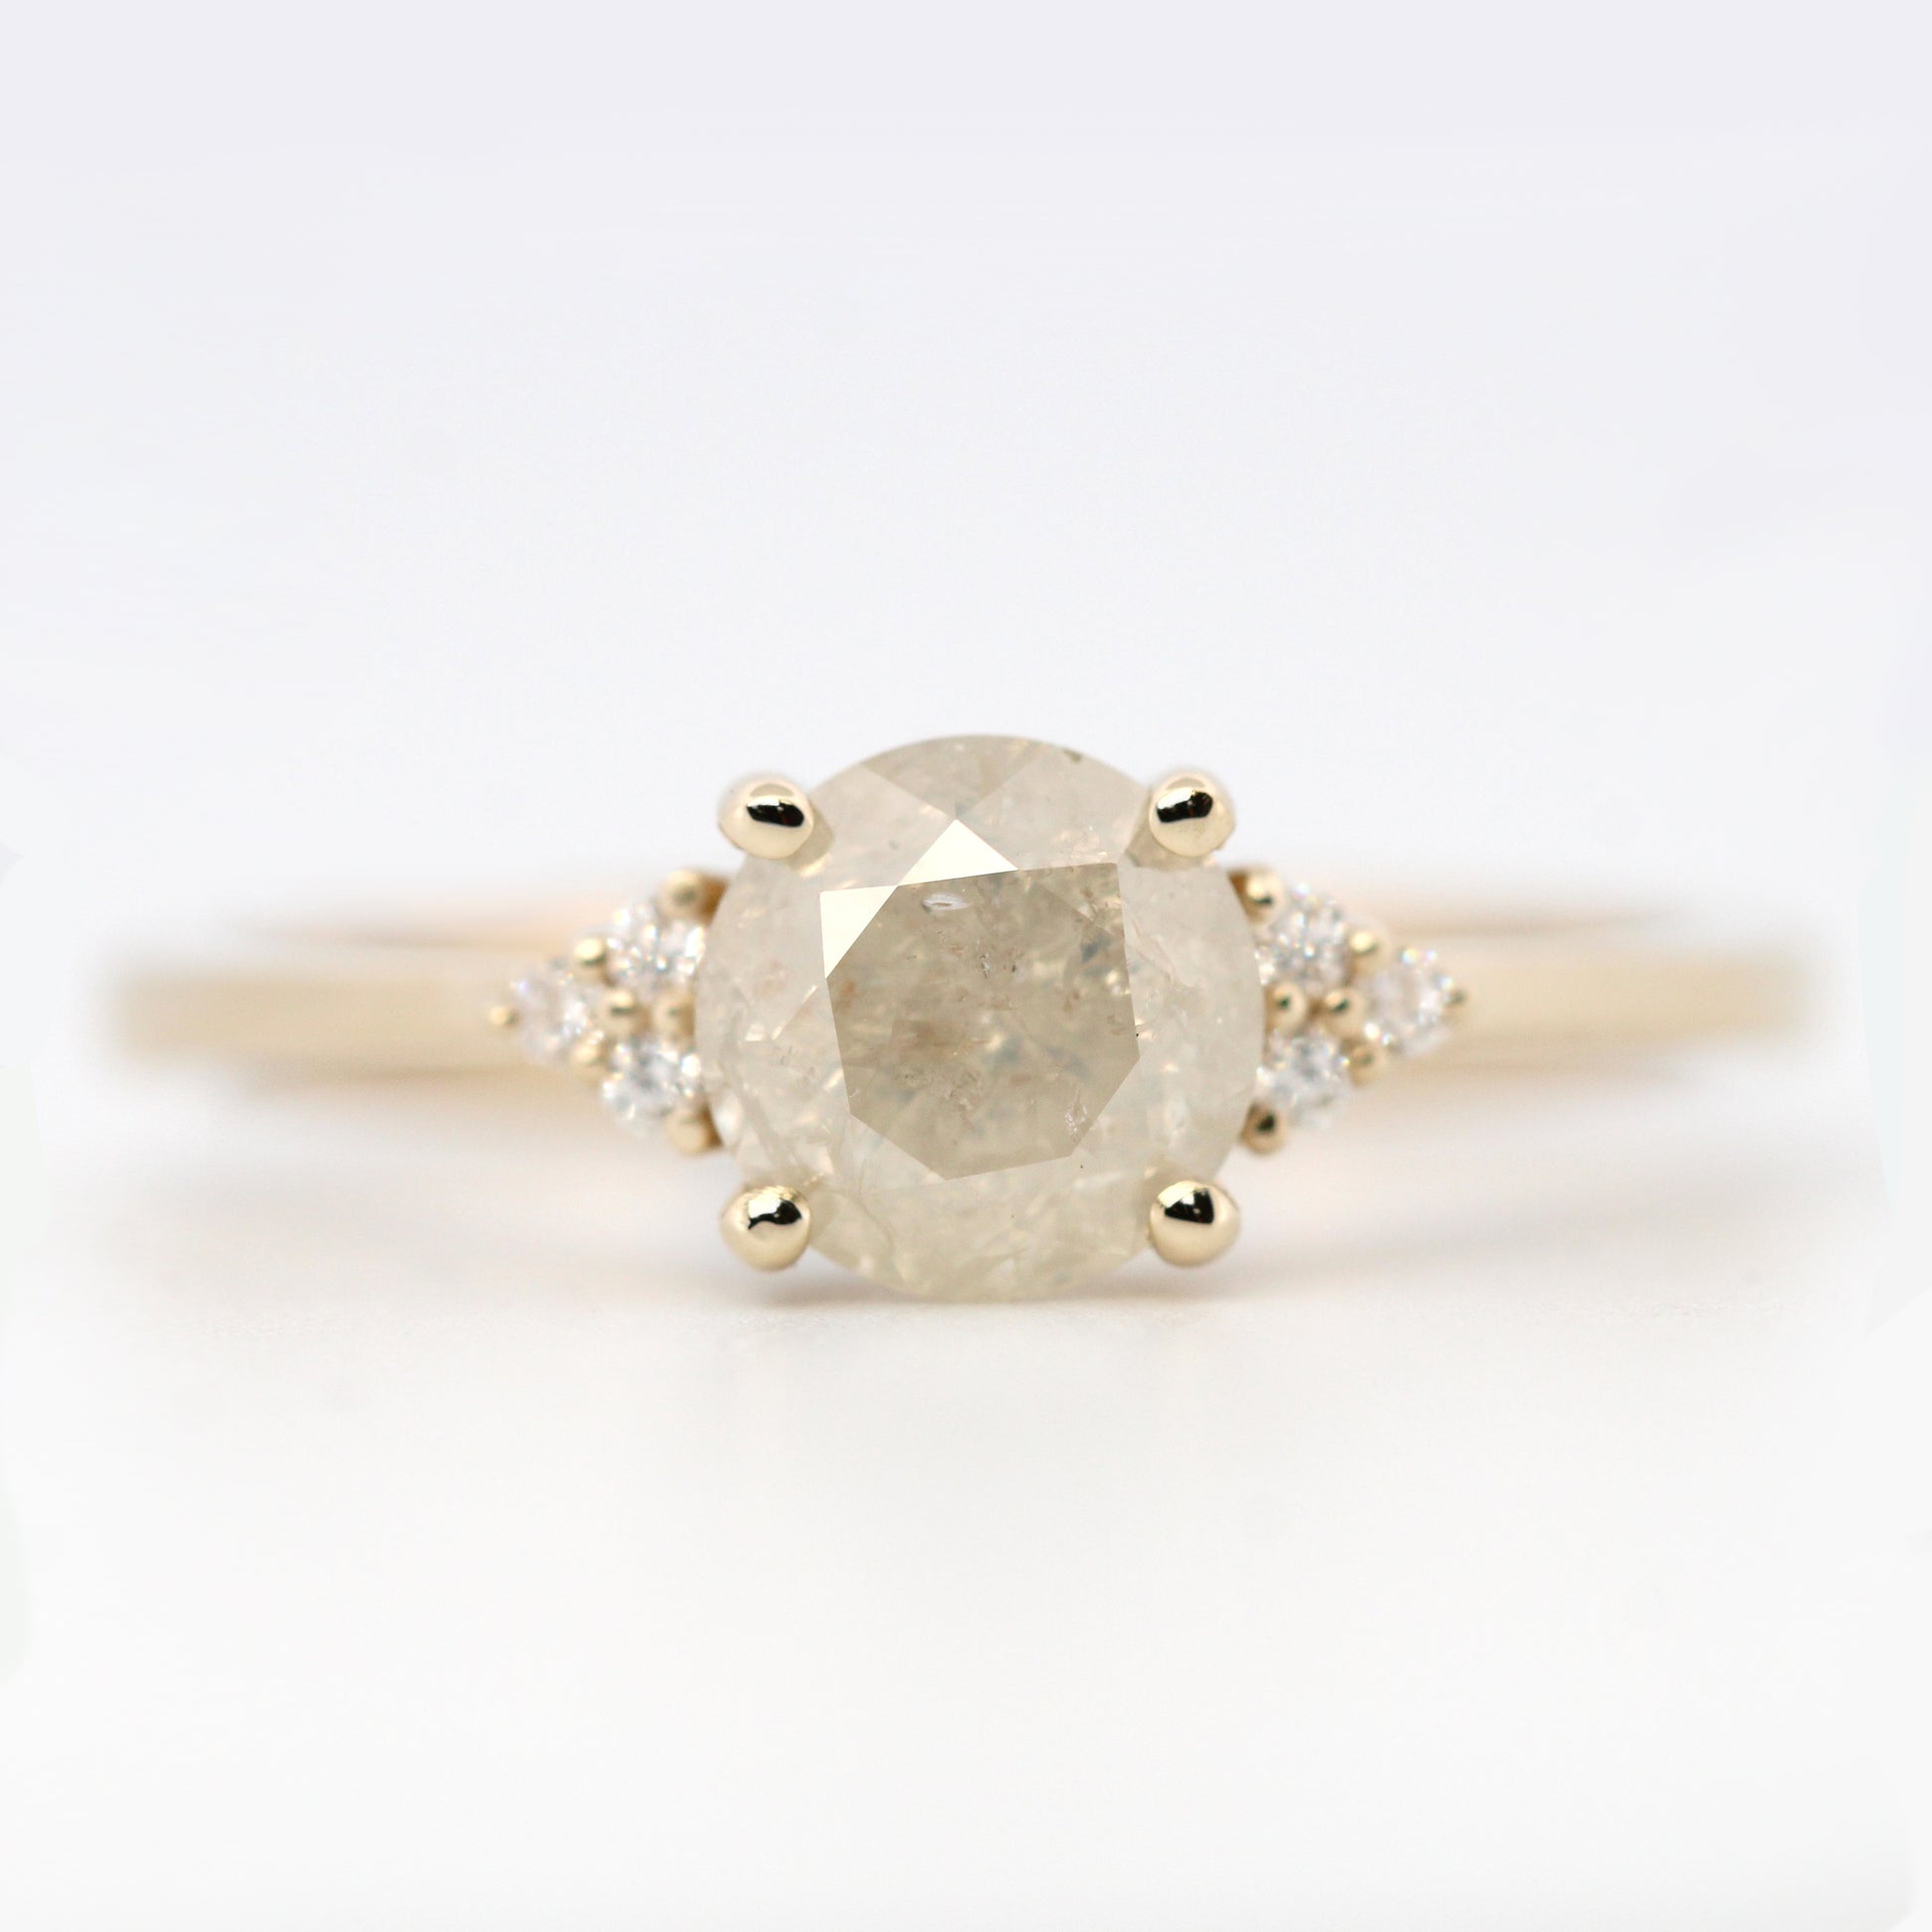 Imogene Ring with a 1.14 Carat Round Misty White Celestial Diamond and White Accent Diamonds in 14k Yellow Gold - Ready to Size and Ship - Midwinter Co. Alternative Bridal Rings and Modern Fine Jewelry